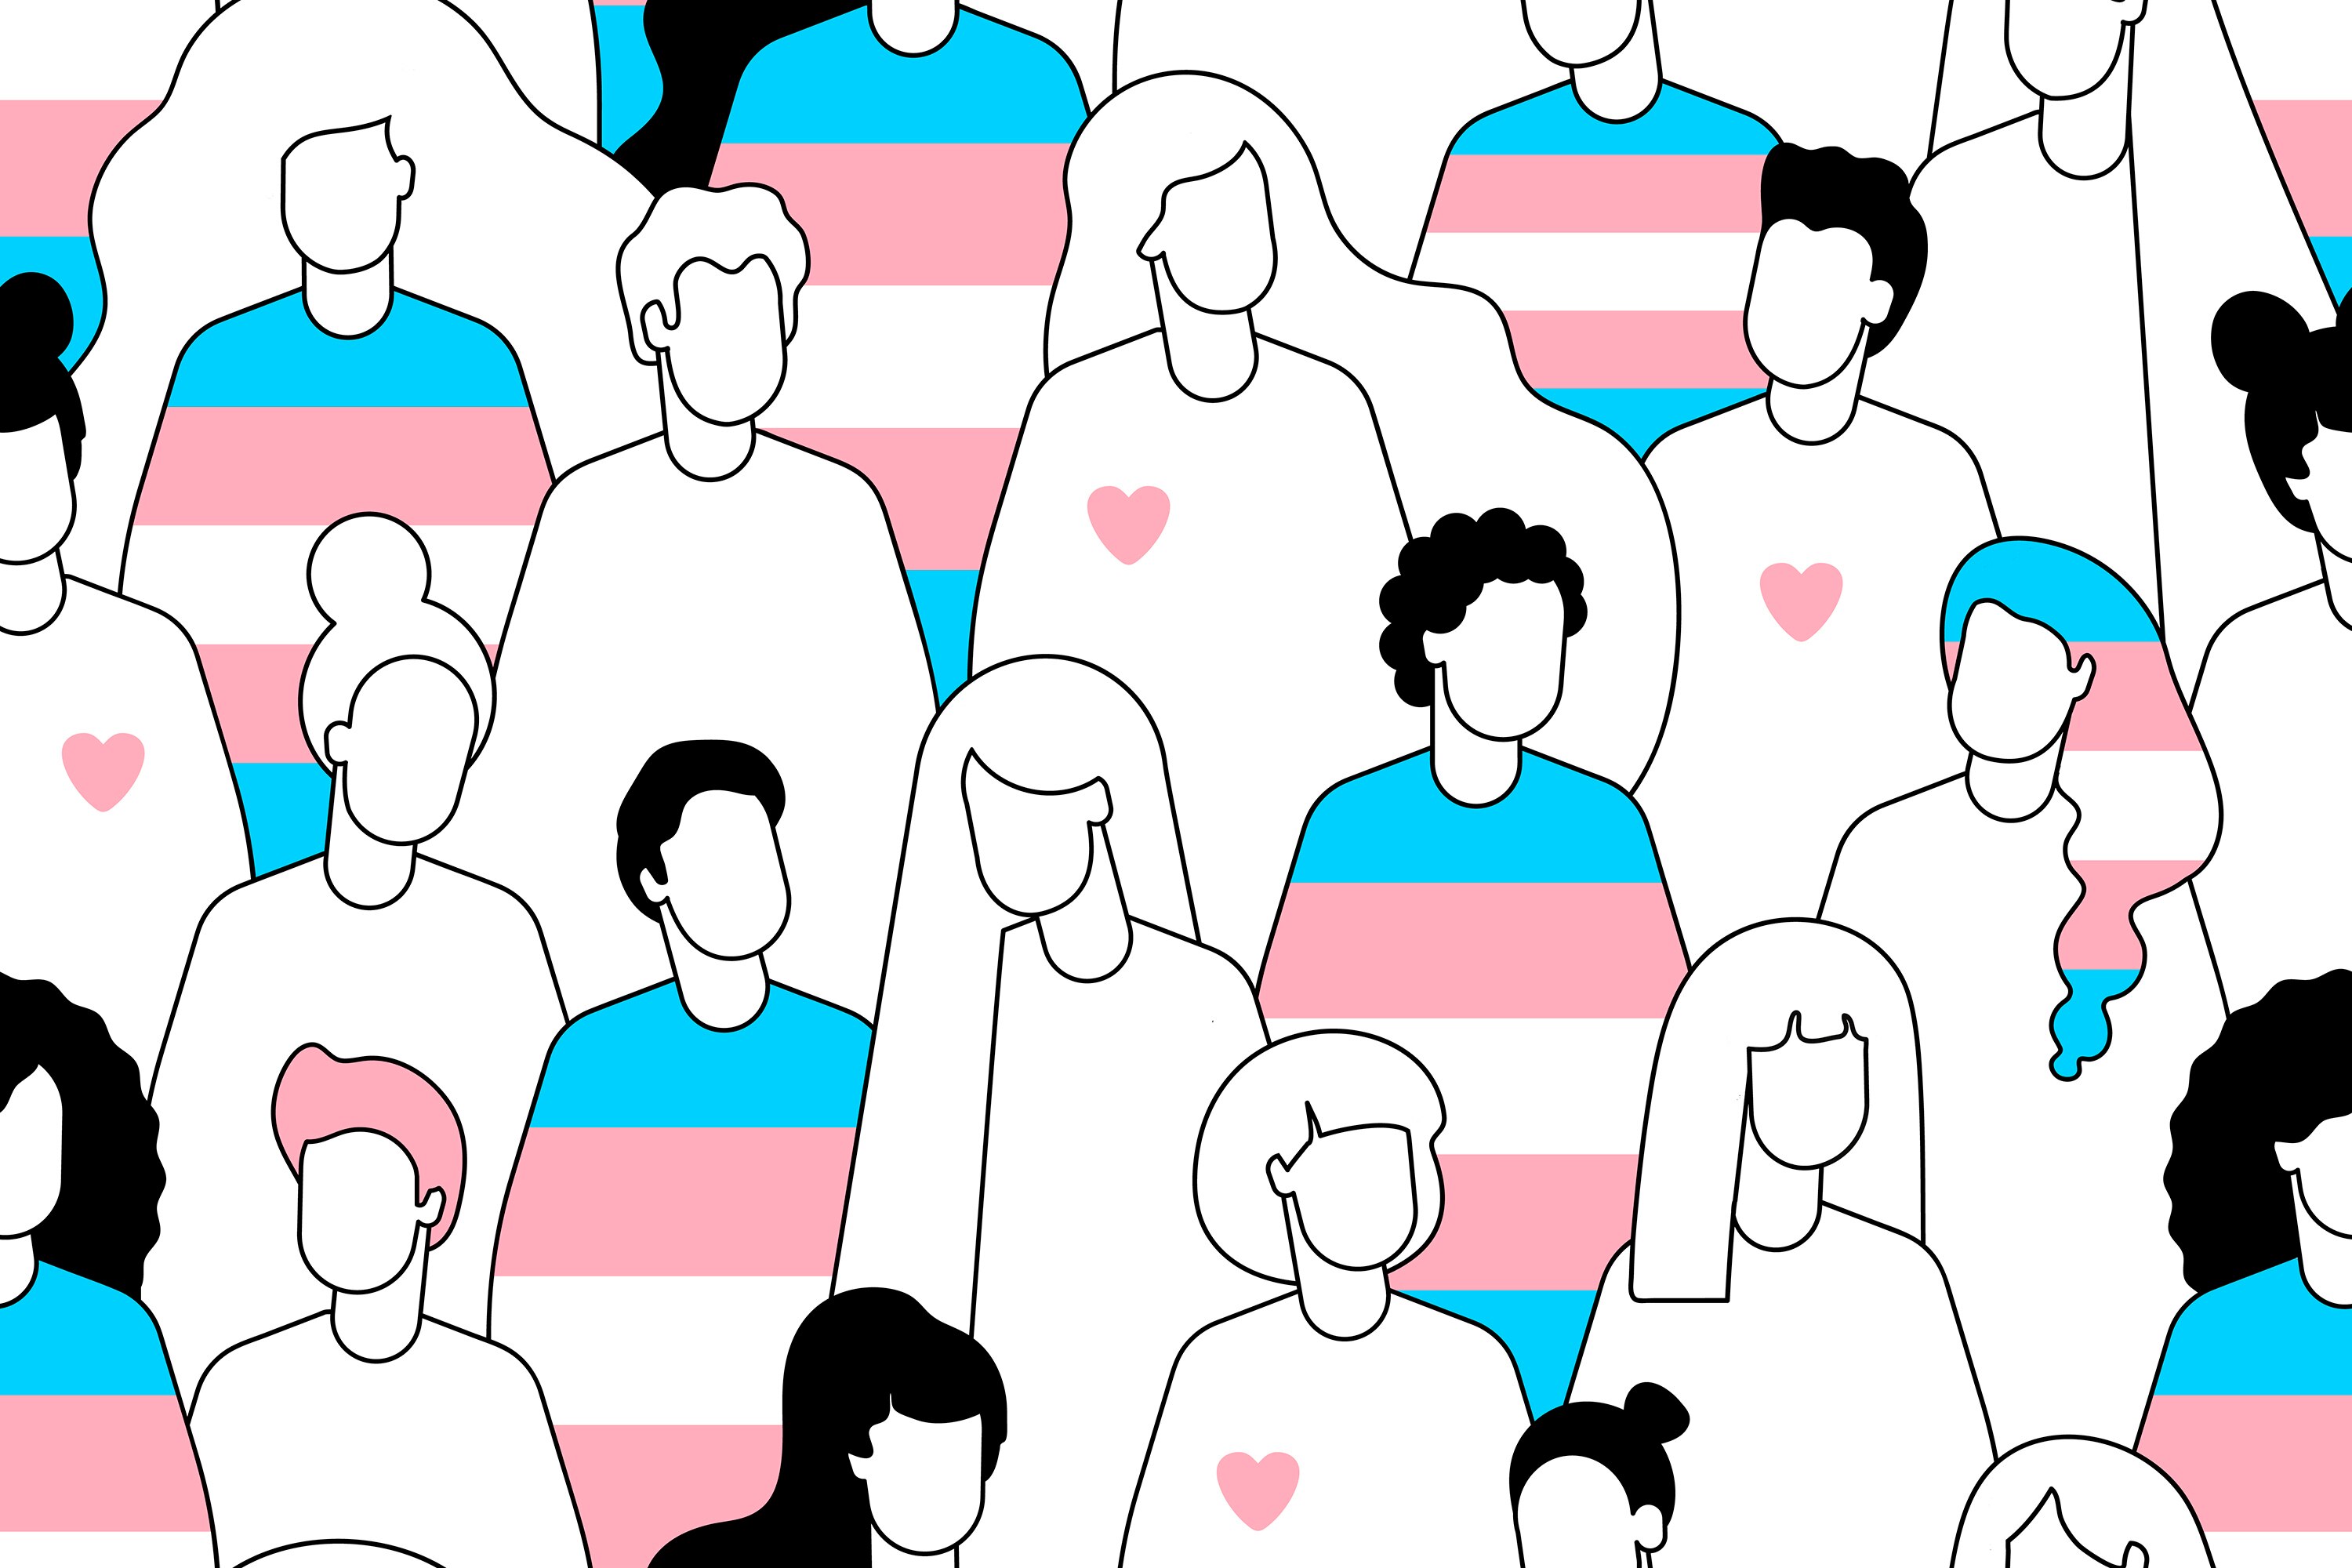 What You Need To Know About Transitioning Gender